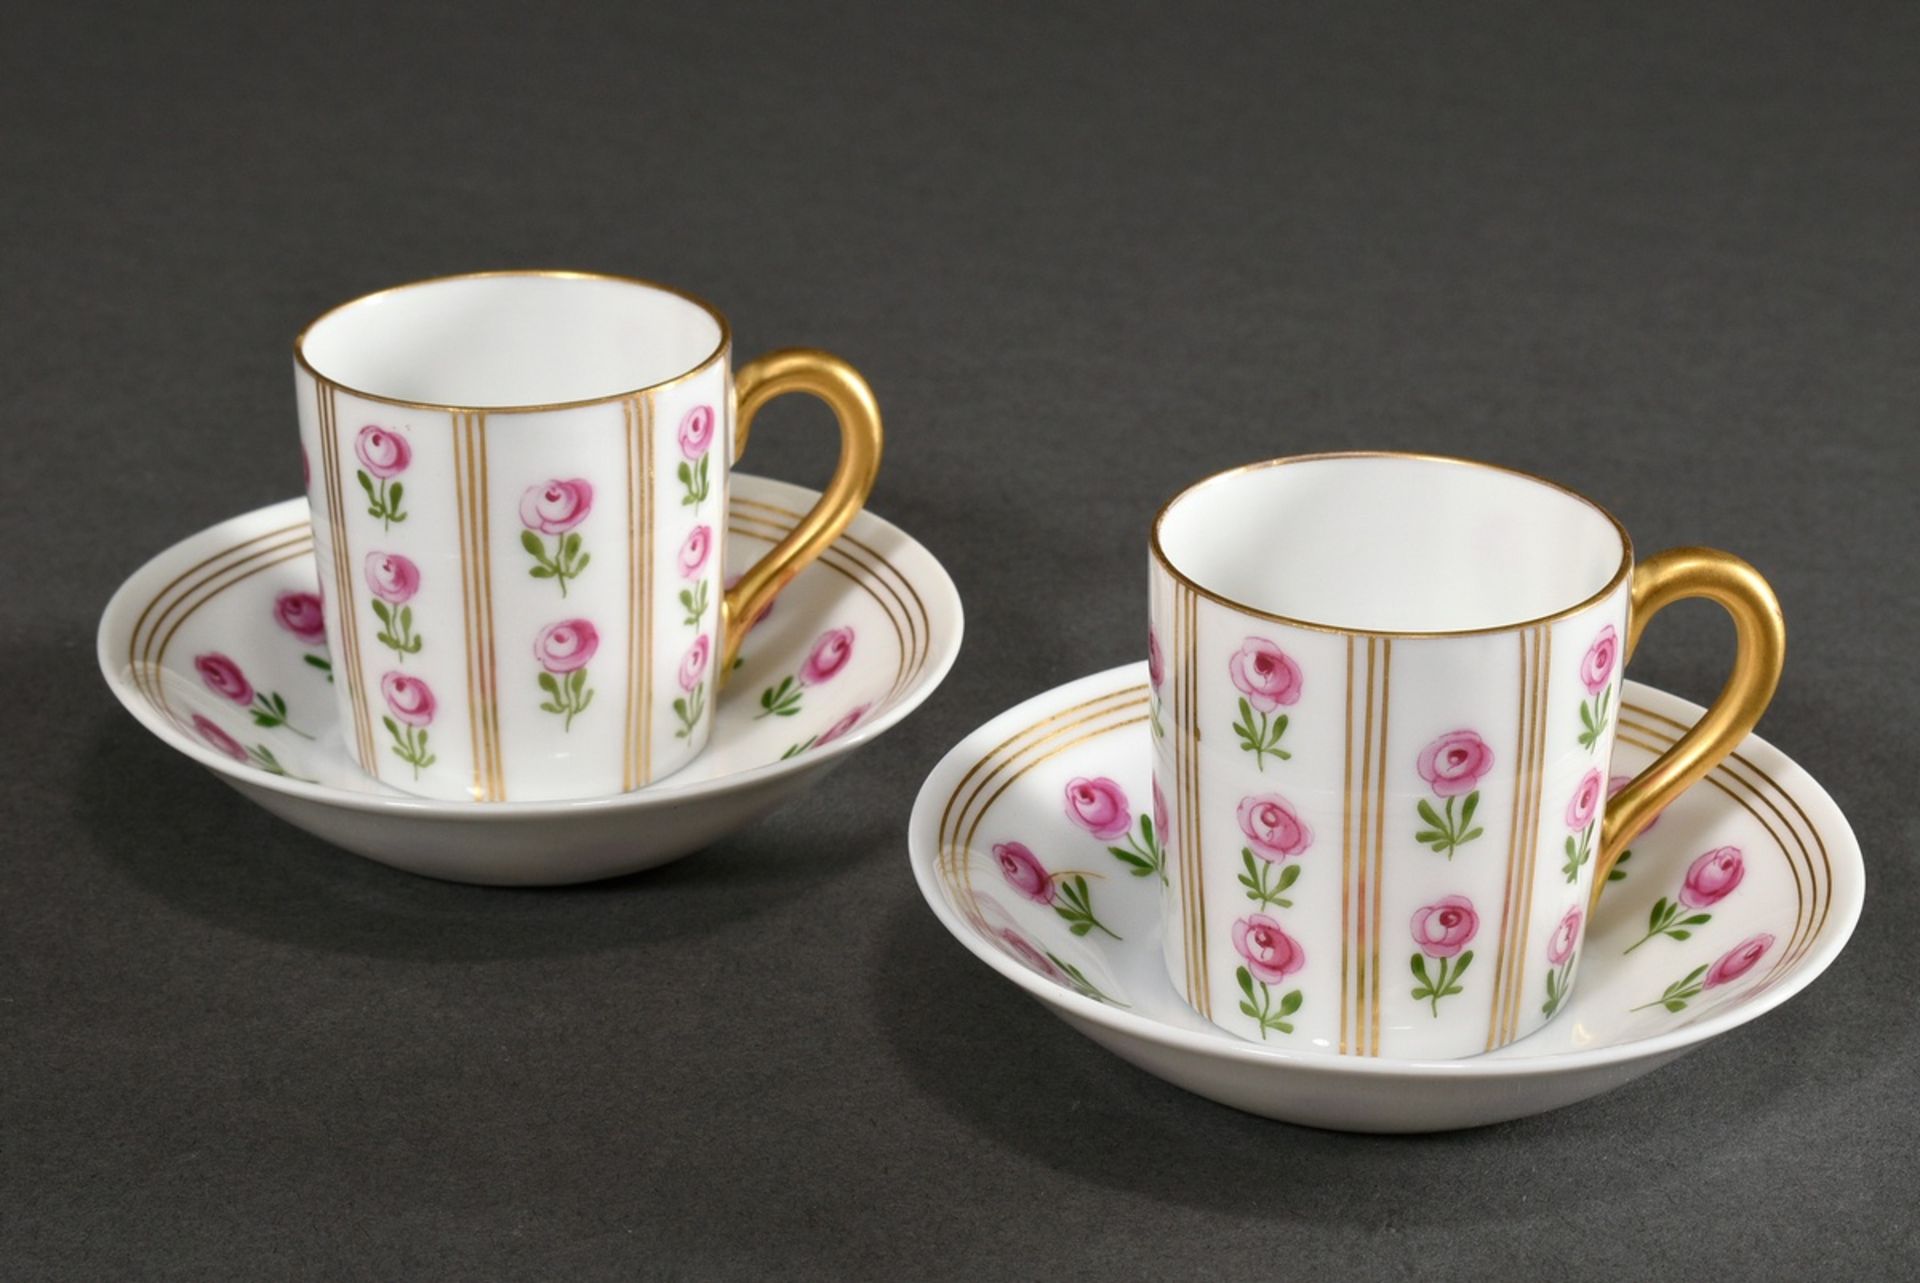 Pair of Nymphenburg mocha cups in cylindrical form "florets with gold stripes", 20th c., h. 5cm - Image 2 of 3